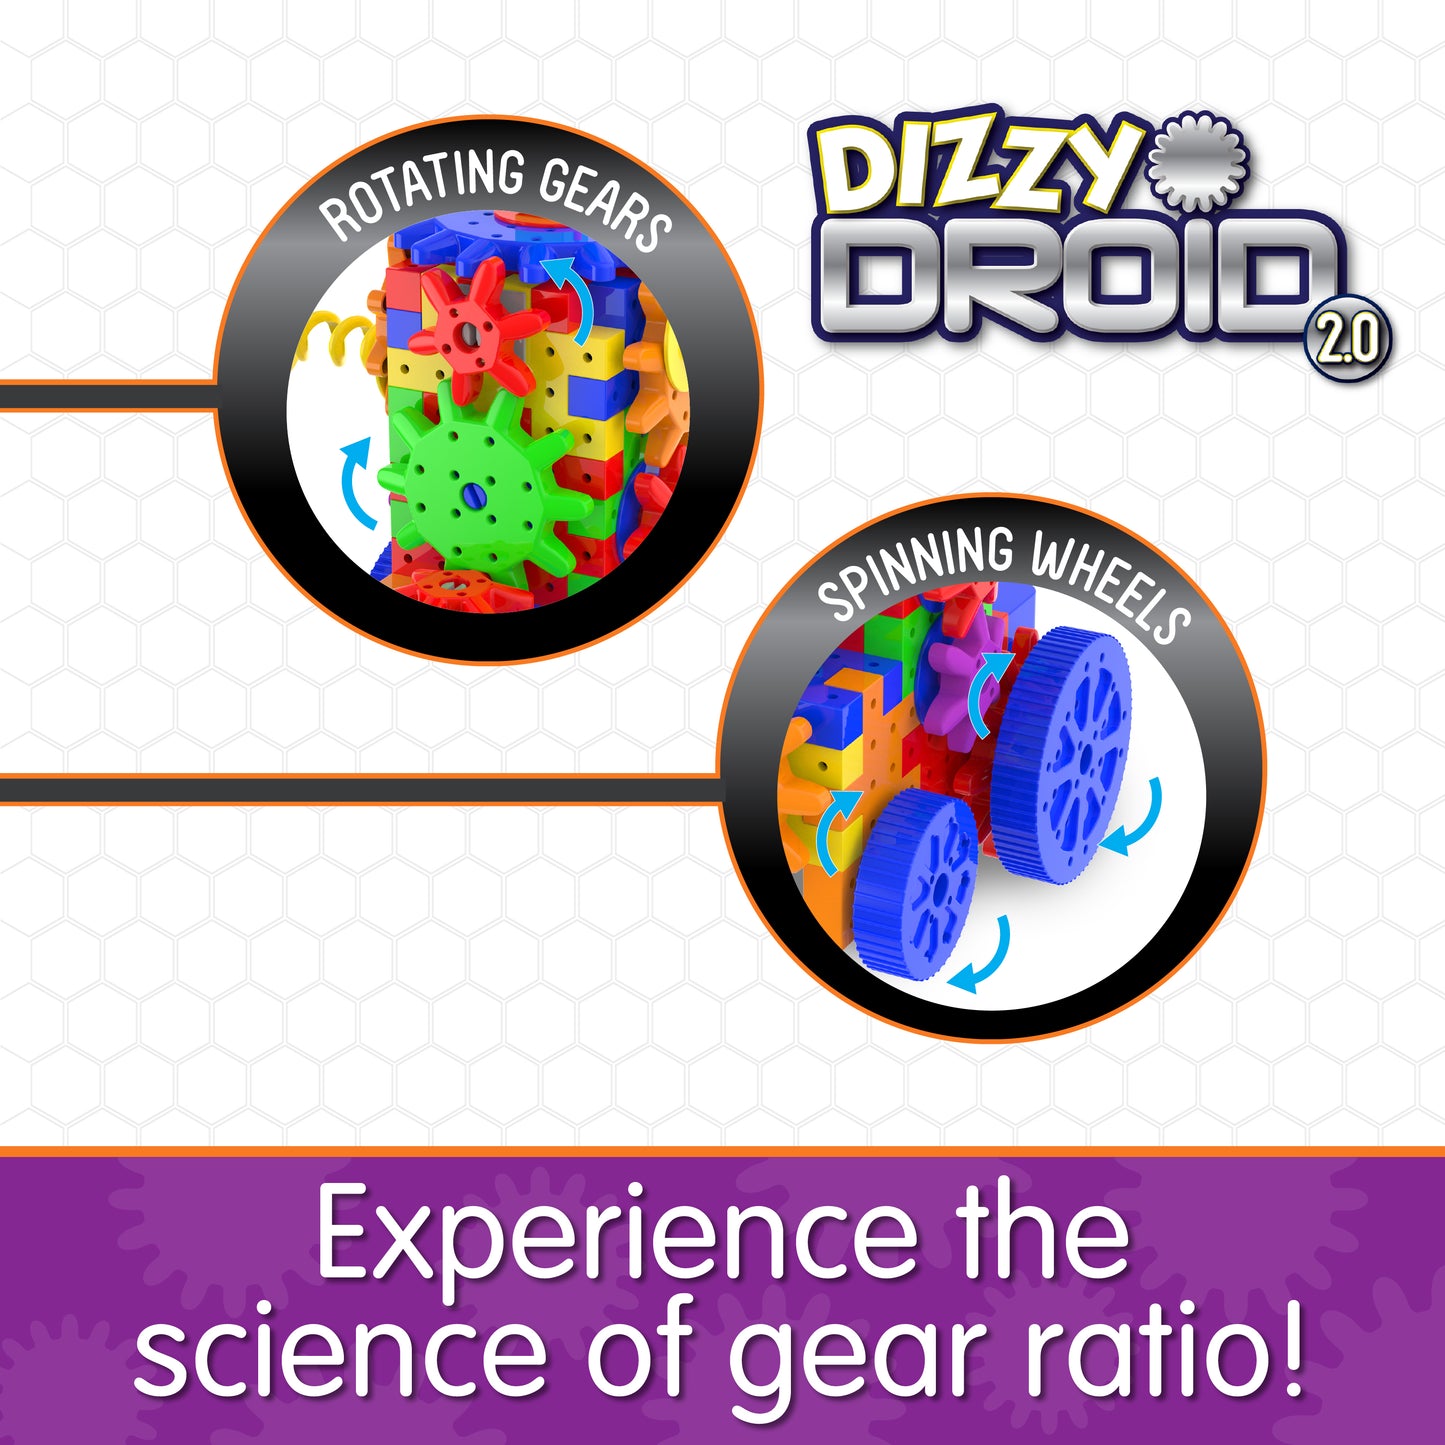 Infographic about Dizzy Droid 2.0's features that says, "Experience the science of gear ratio!"